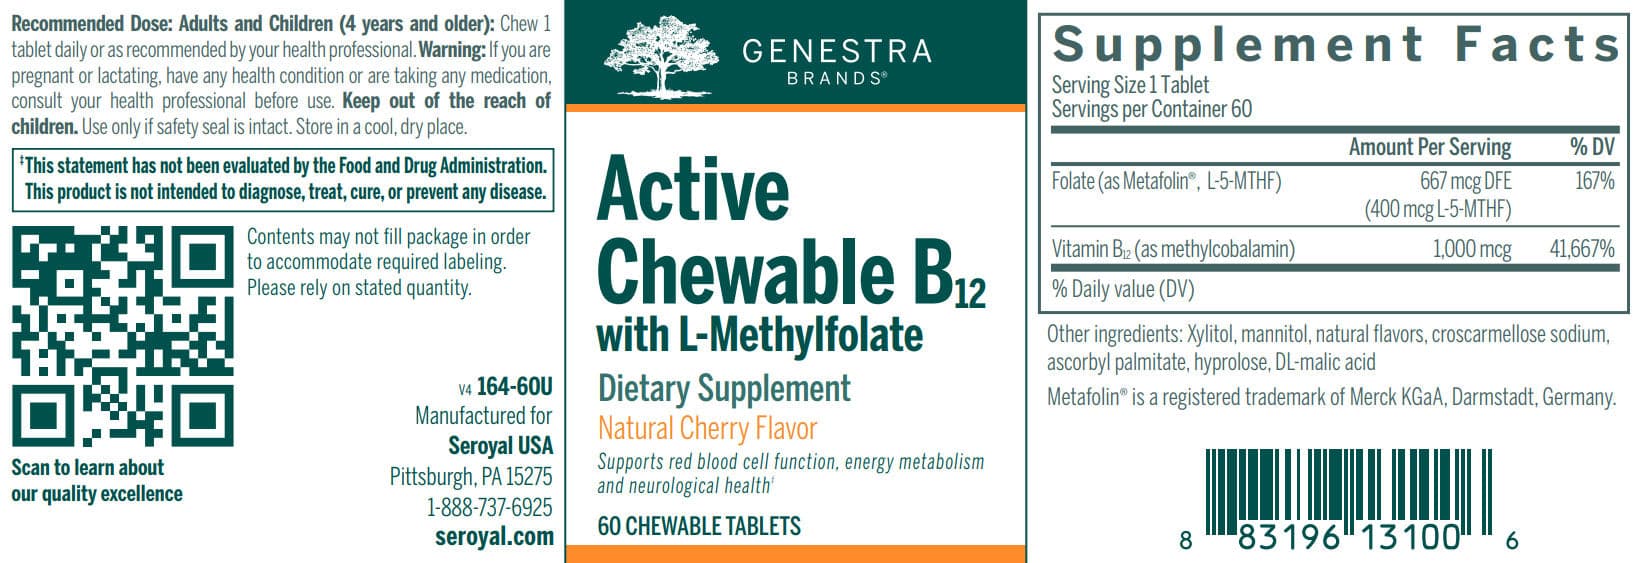 Genestra Brands Active Chewable B12 with L-Methylfolate Label